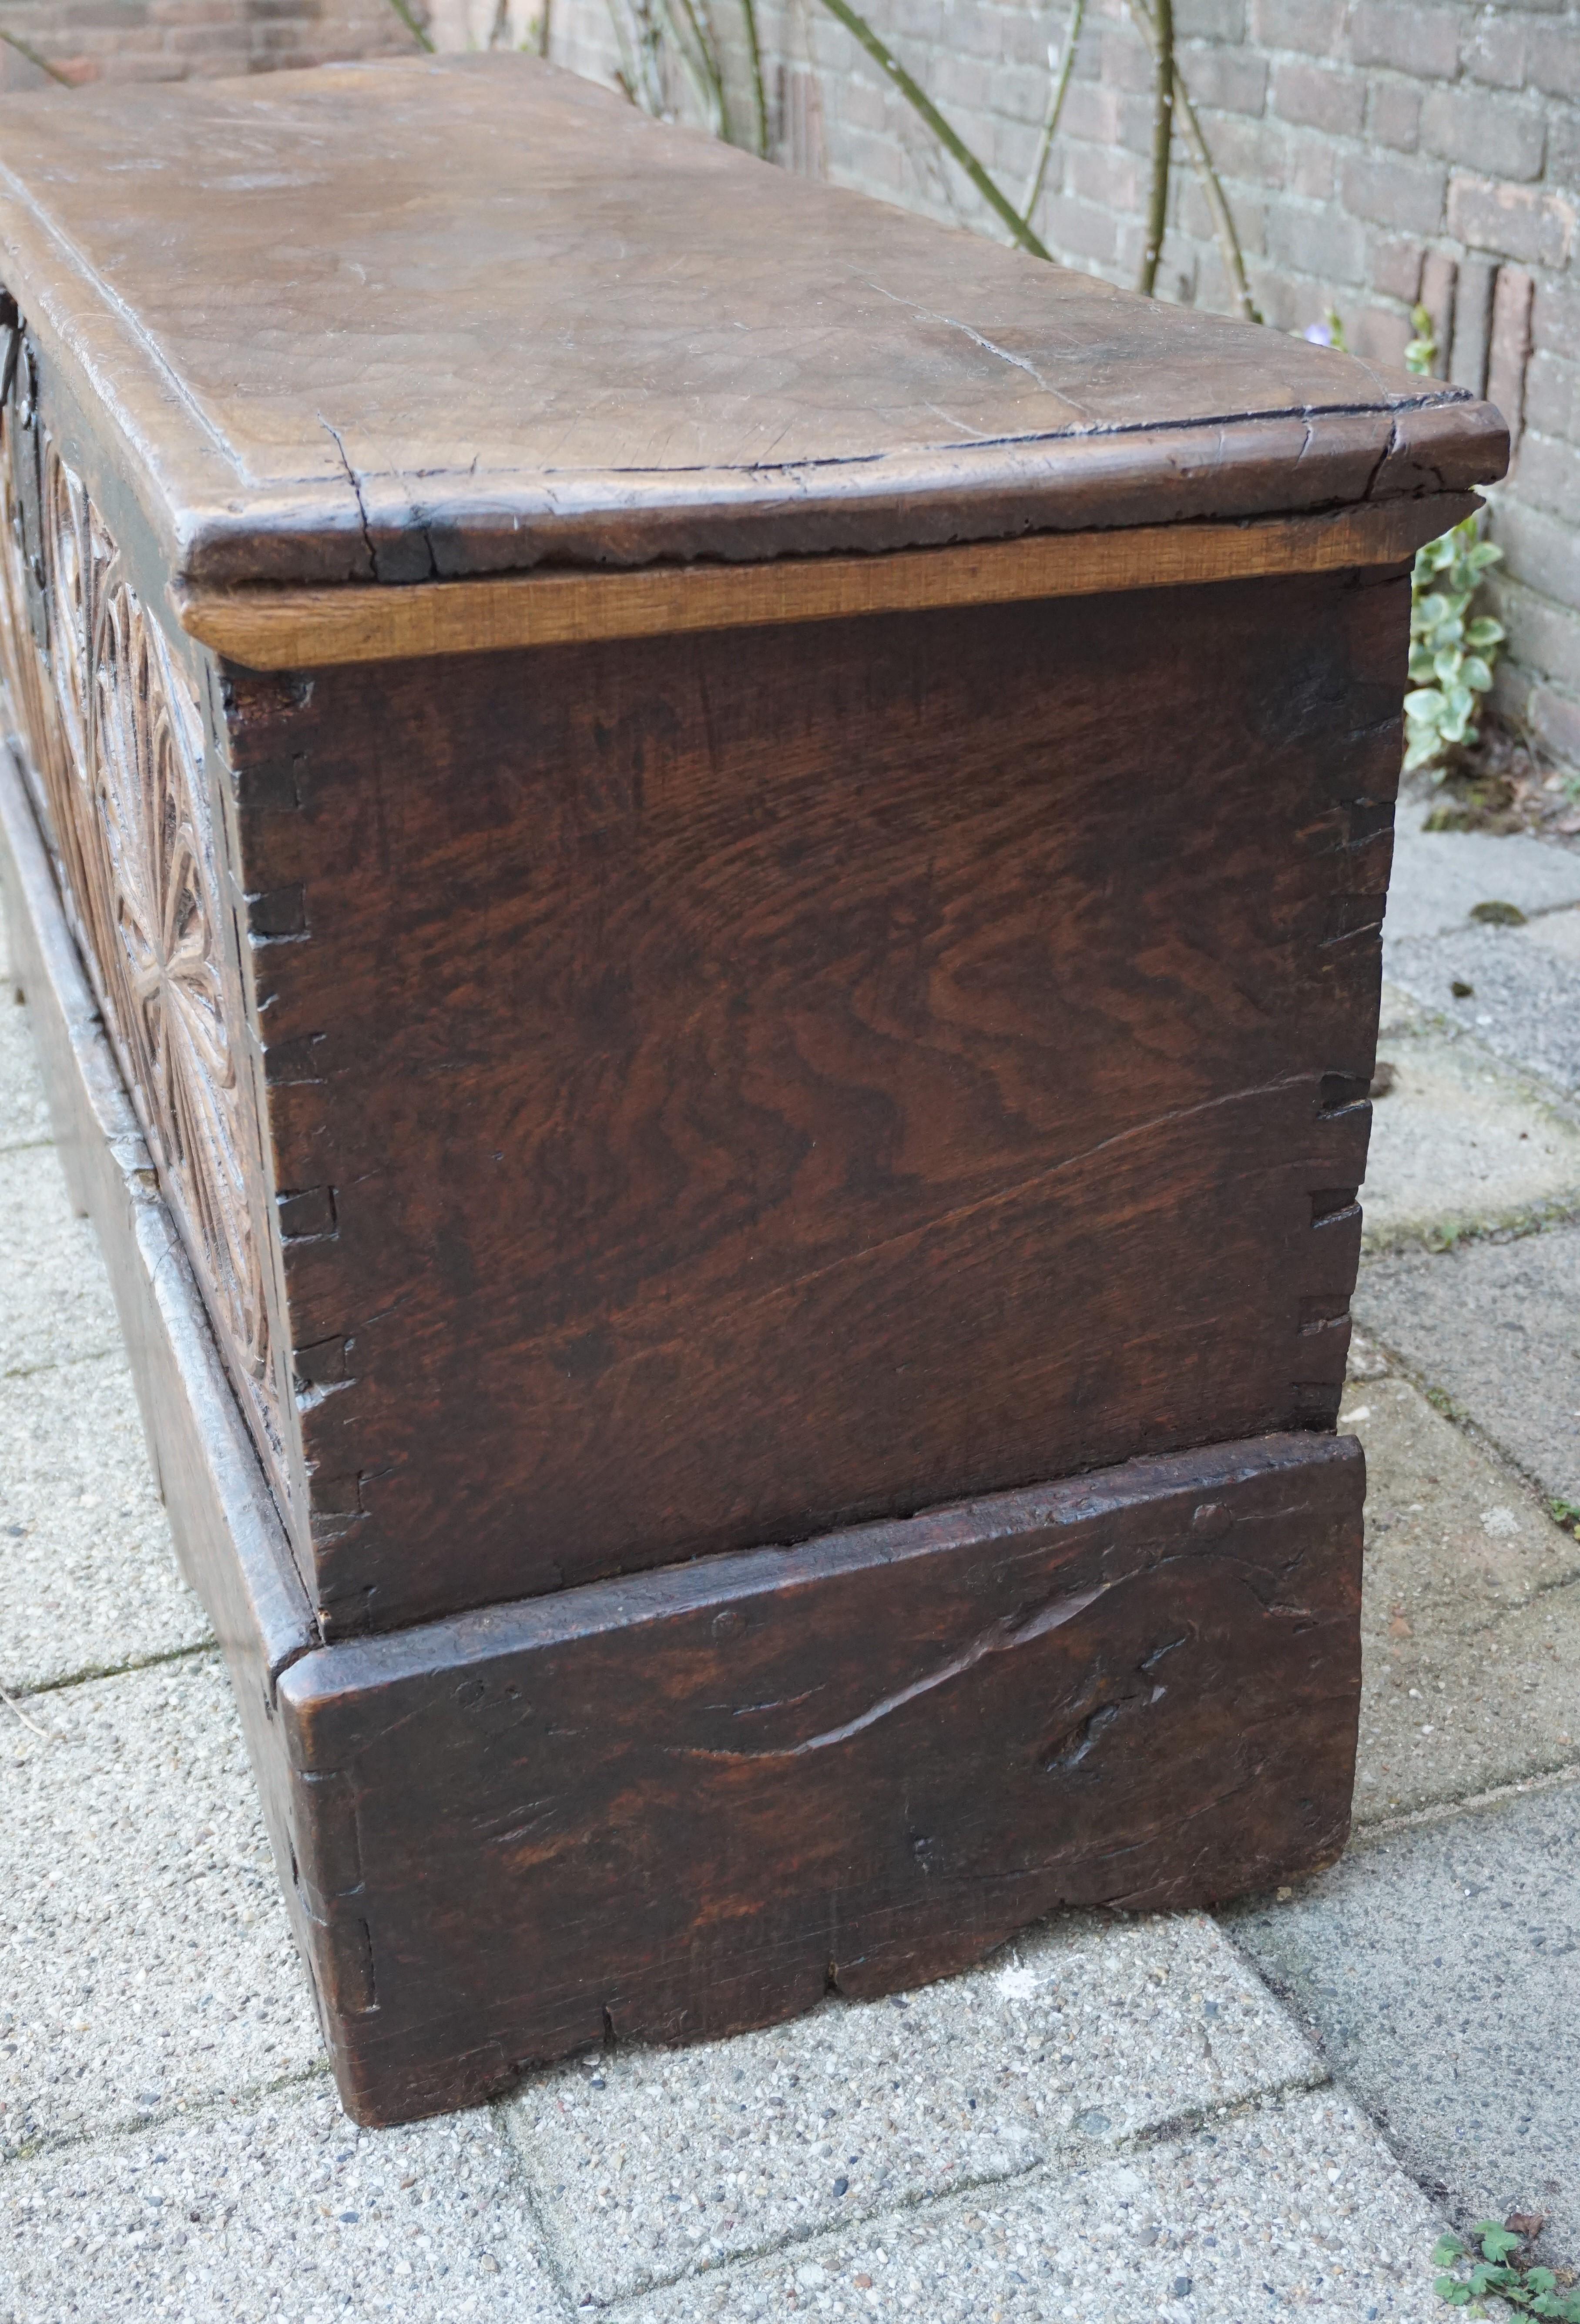 18th Century Antique Gothic Revival Blanket Chest / Trunk with an Amazing Patina 1680 - 1720